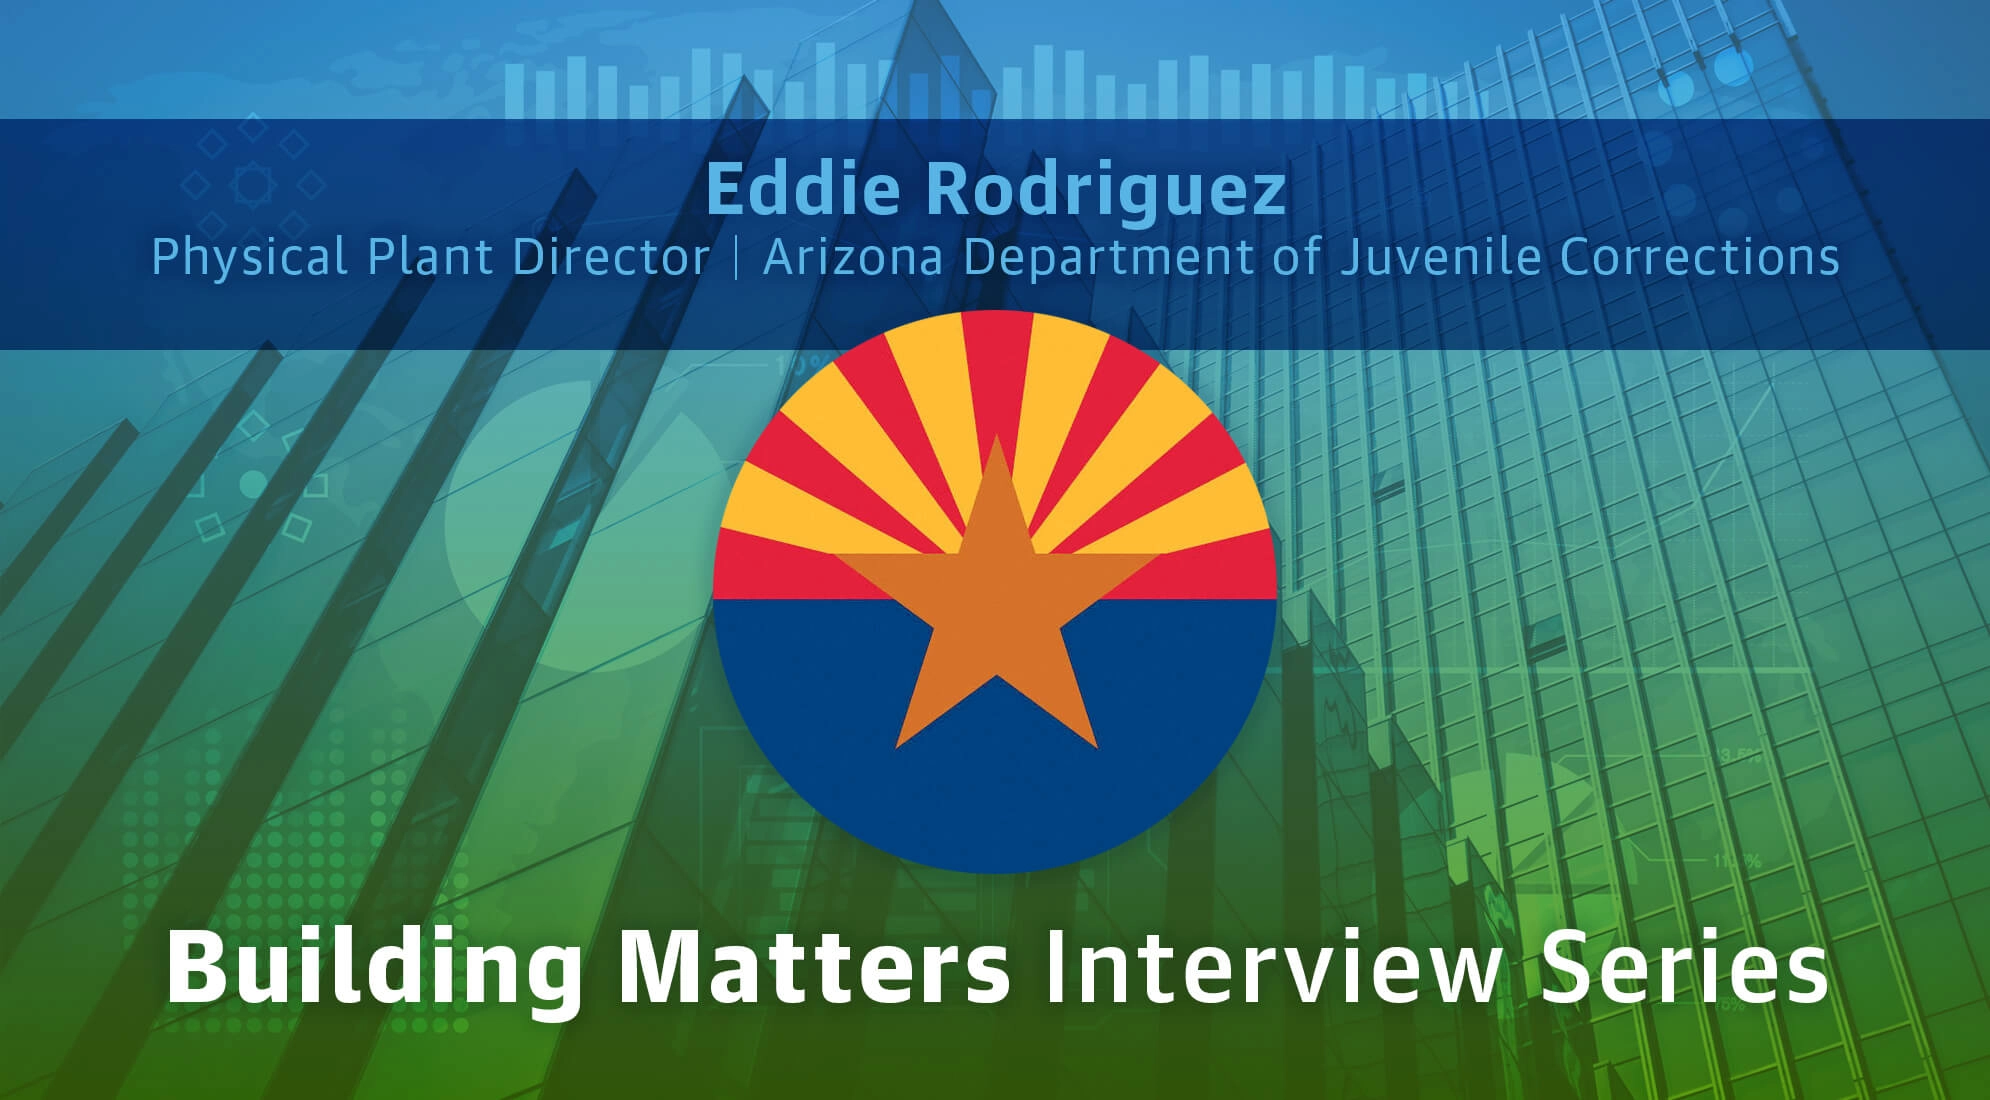 Building Matters Interview Series: Correctional Facilities Insights from Eddie Rodriguez 2